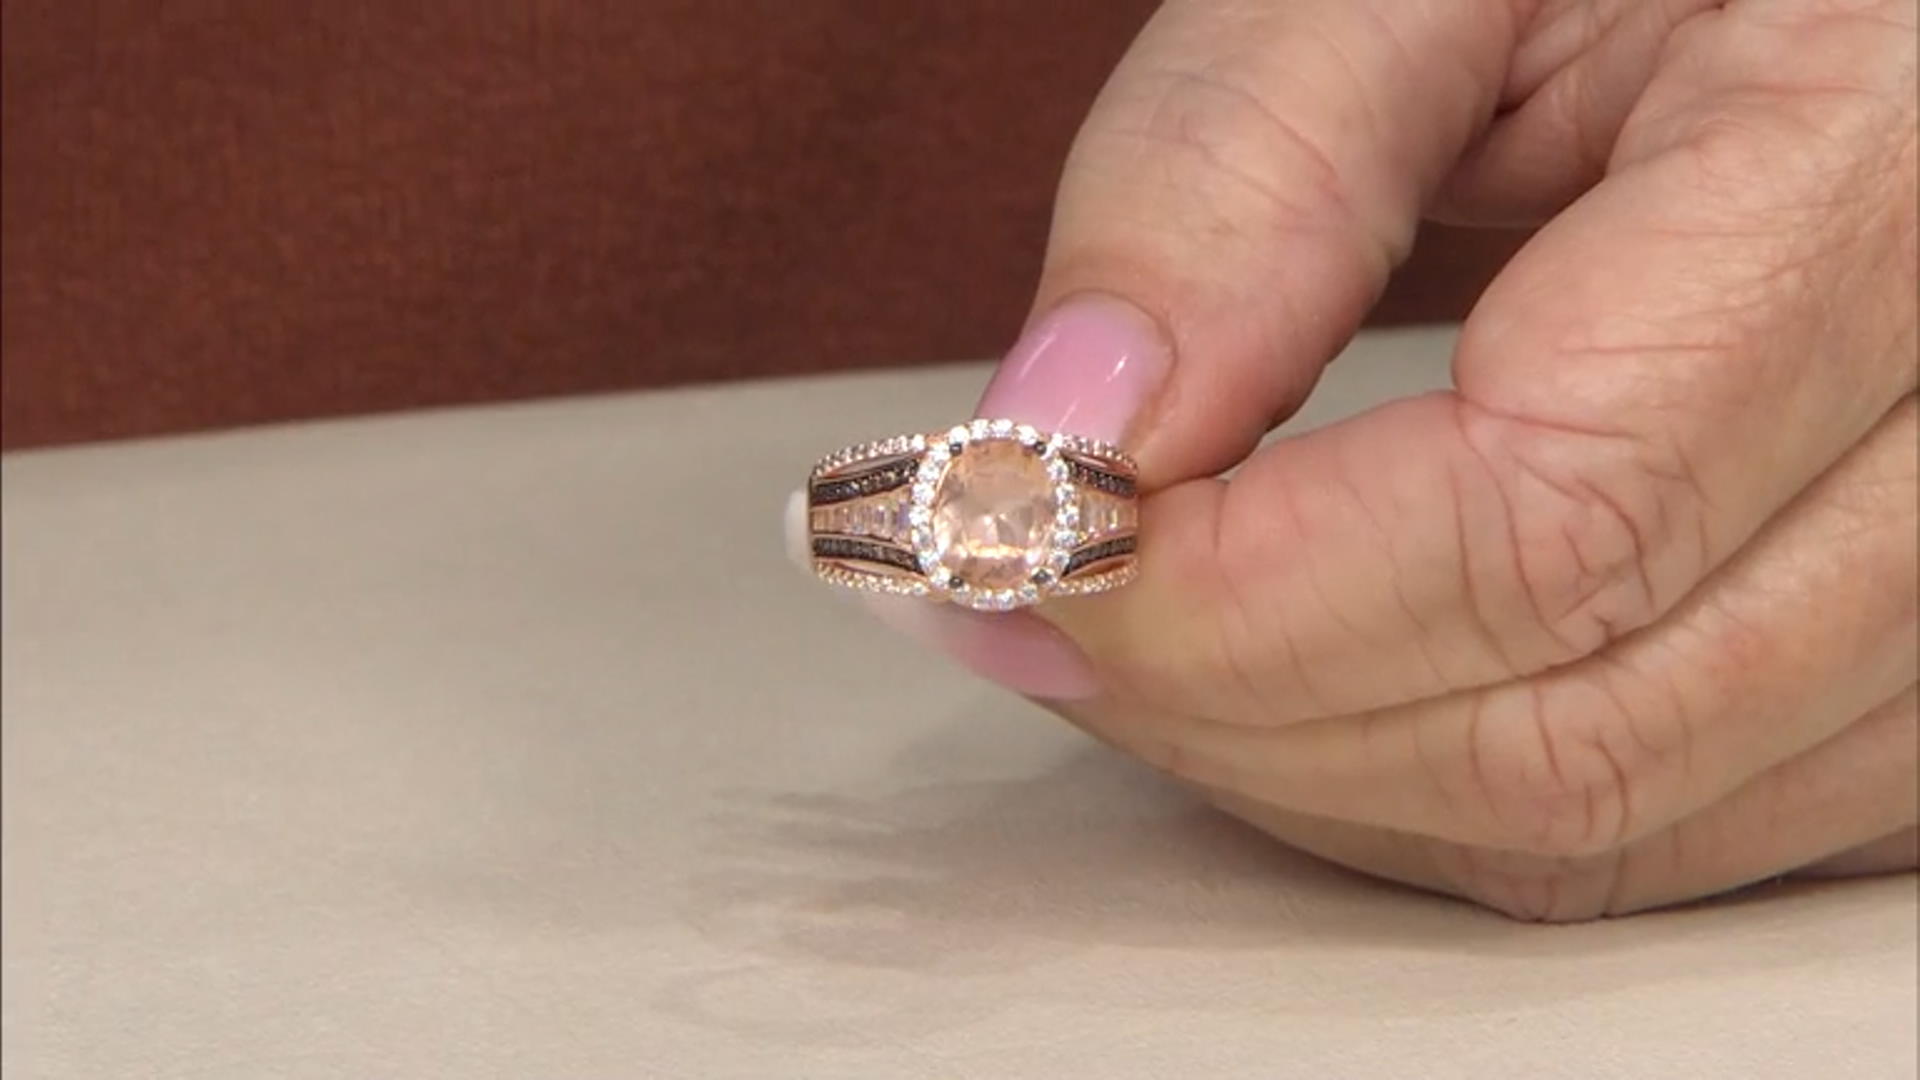 Pink Morganite Simulant And Mocha And White Cubic Zirconia 18k Rose Gold Over Silver Ring Video Thumbnail